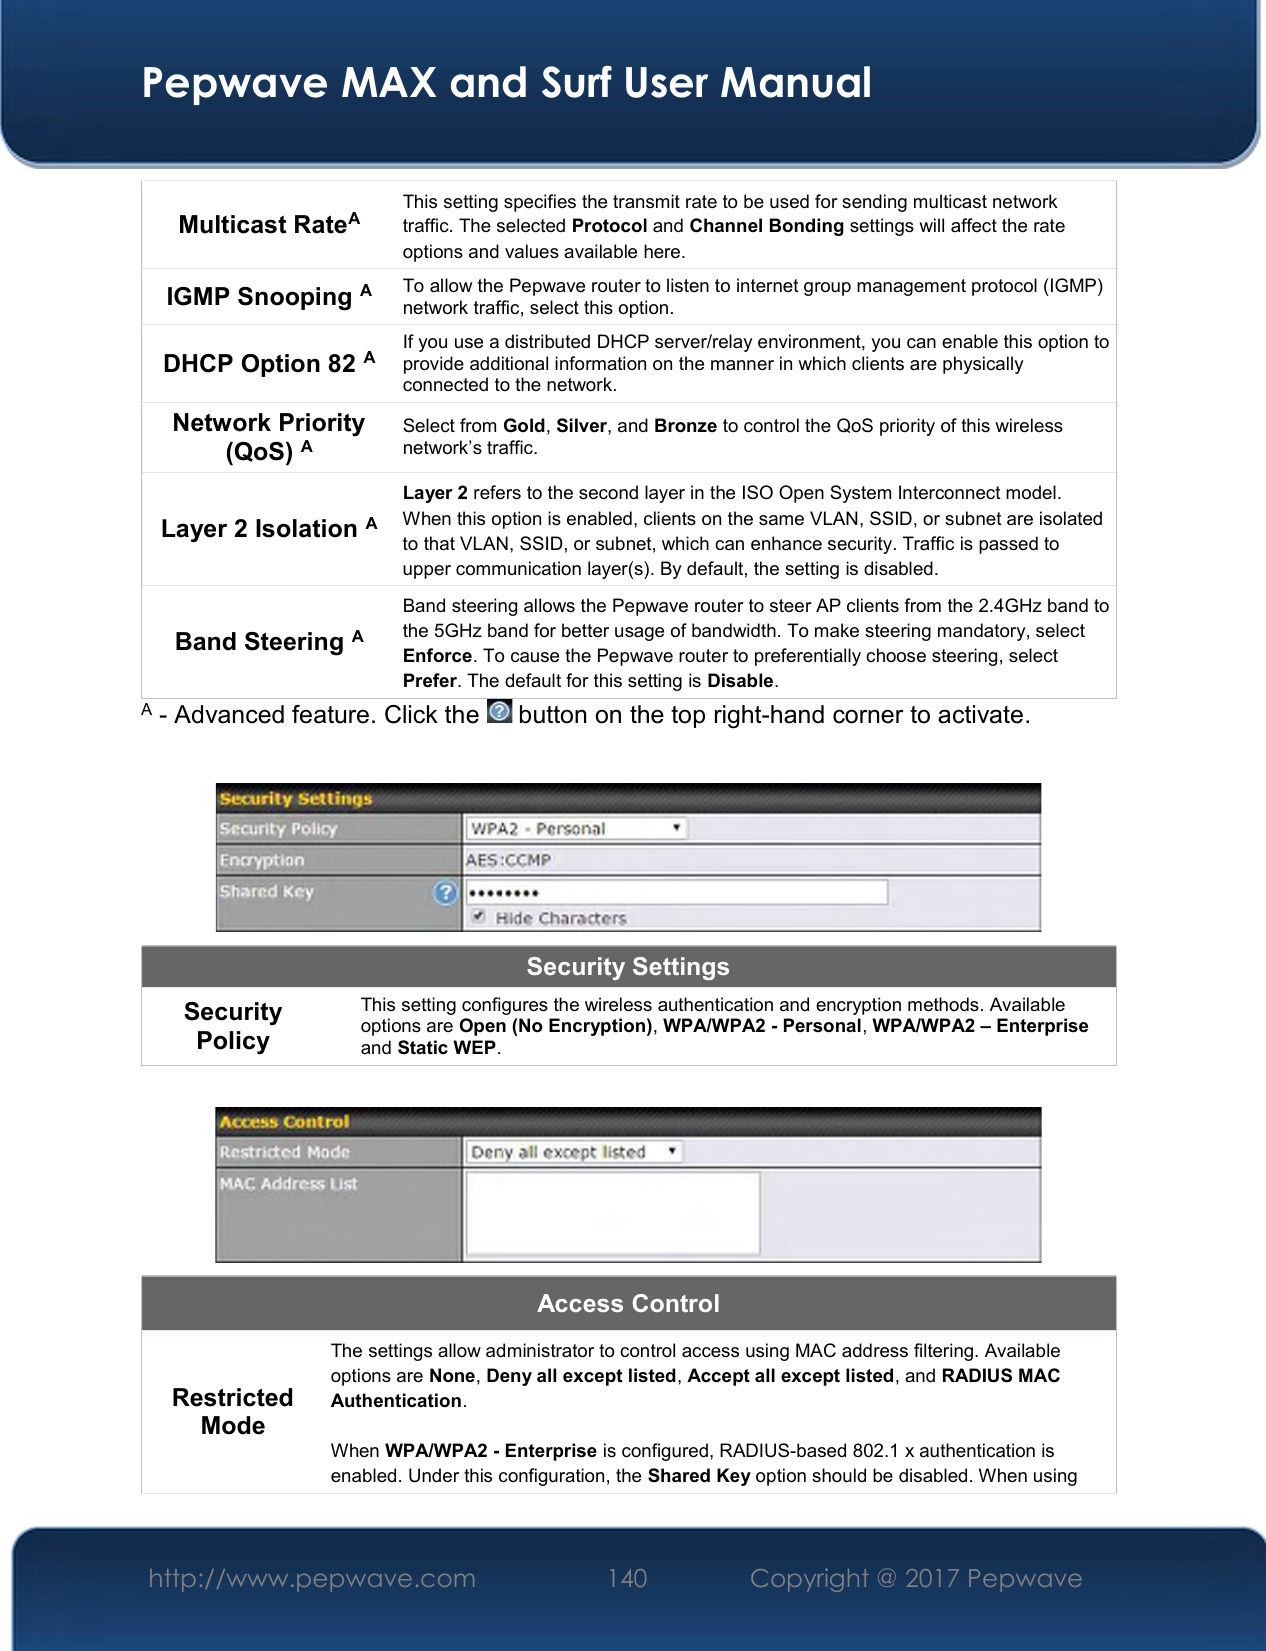  Pepwave MAX and Surf User Manual http://www.pepwave.com  140    Copyright @ 2017 Pepwave   Multicast RateA This setting specifies the transmit rate to be used for sending multicast network traffic. The selected Protocol and Channel Bonding settings will affect the rate options and values available here. IGMP Snooping A To allow the Pepwave router to listen to internet group management protocol (IGMP) network traffic, select this option. DHCP Option 82 A If you use a distributed DHCP server/relay environment, you can enable this option to provide additional information on the manner in which clients are physically connected to the network. Network Priority (QoS) A Select from Gold, Silver, and Bronze to control the QoS priority of this wireless network’s traffic. Layer 2 Isolation A Layer 2 refers to the second layer in the ISO Open System Interconnect model. When this option is enabled, clients on the same VLAN, SSID, or subnet are isolated to that VLAN, SSID, or subnet, which can enhance security. Traffic is passed to upper communication layer(s). By default, the setting is disabled.  Band Steering A Band steering allows the Pepwave router to steer AP clients from the 2.4GHz band to the 5GHz band for better usage of bandwidth. To make steering mandatory, select Enforce. To cause the Pepwave router to preferentially choose steering, select Prefer. The default for this setting is Disable. A - Advanced feature. Click the   button on the top right-hand corner to activate.   Security Settings Security Policy This setting configures the wireless authentication and encryption methods. Available options are Open (No Encryption), WPA/WPA2 - Personal, WPA/WPA2 – Enterprise and Static WEP.   Access Control Restricted Mode The settings allow administrator to control access using MAC address filtering. Available options are None, Deny all except listed, Accept all except listed, and RADIUS MAC Authentication.  When WPA/WPA2 - Enterprise is configured, RADIUS-based 802.1 x authentication is enabled. Under this configuration, the Shared Key option should be disabled. When using 